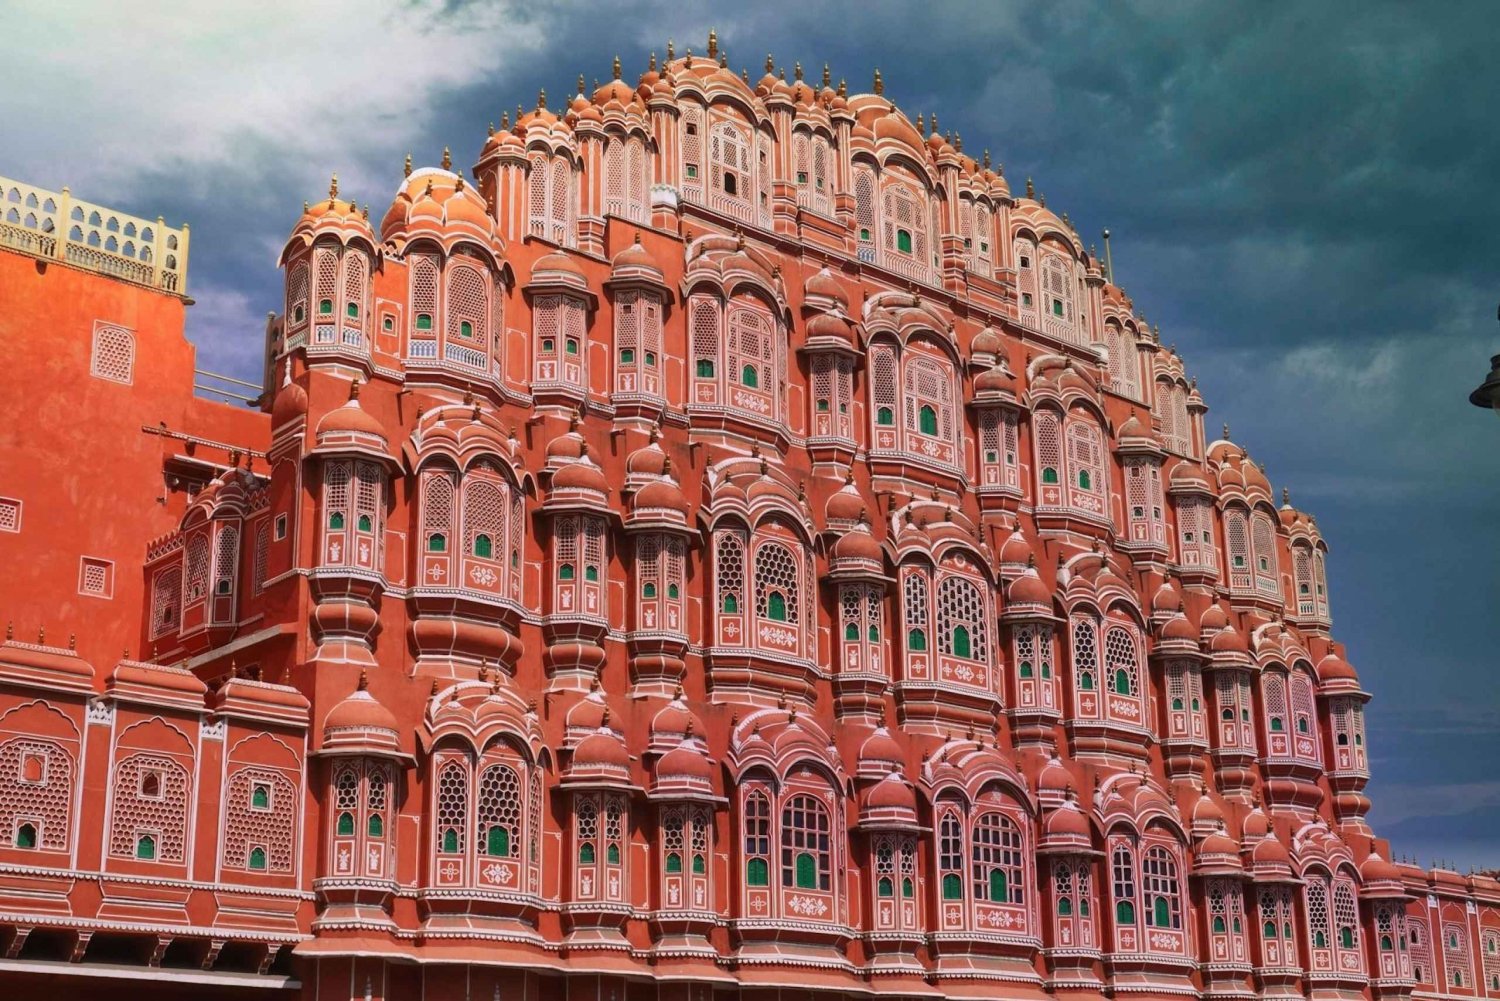 Jaipur: All-Inclusive Amer Fort and Jaipur City Private Tour